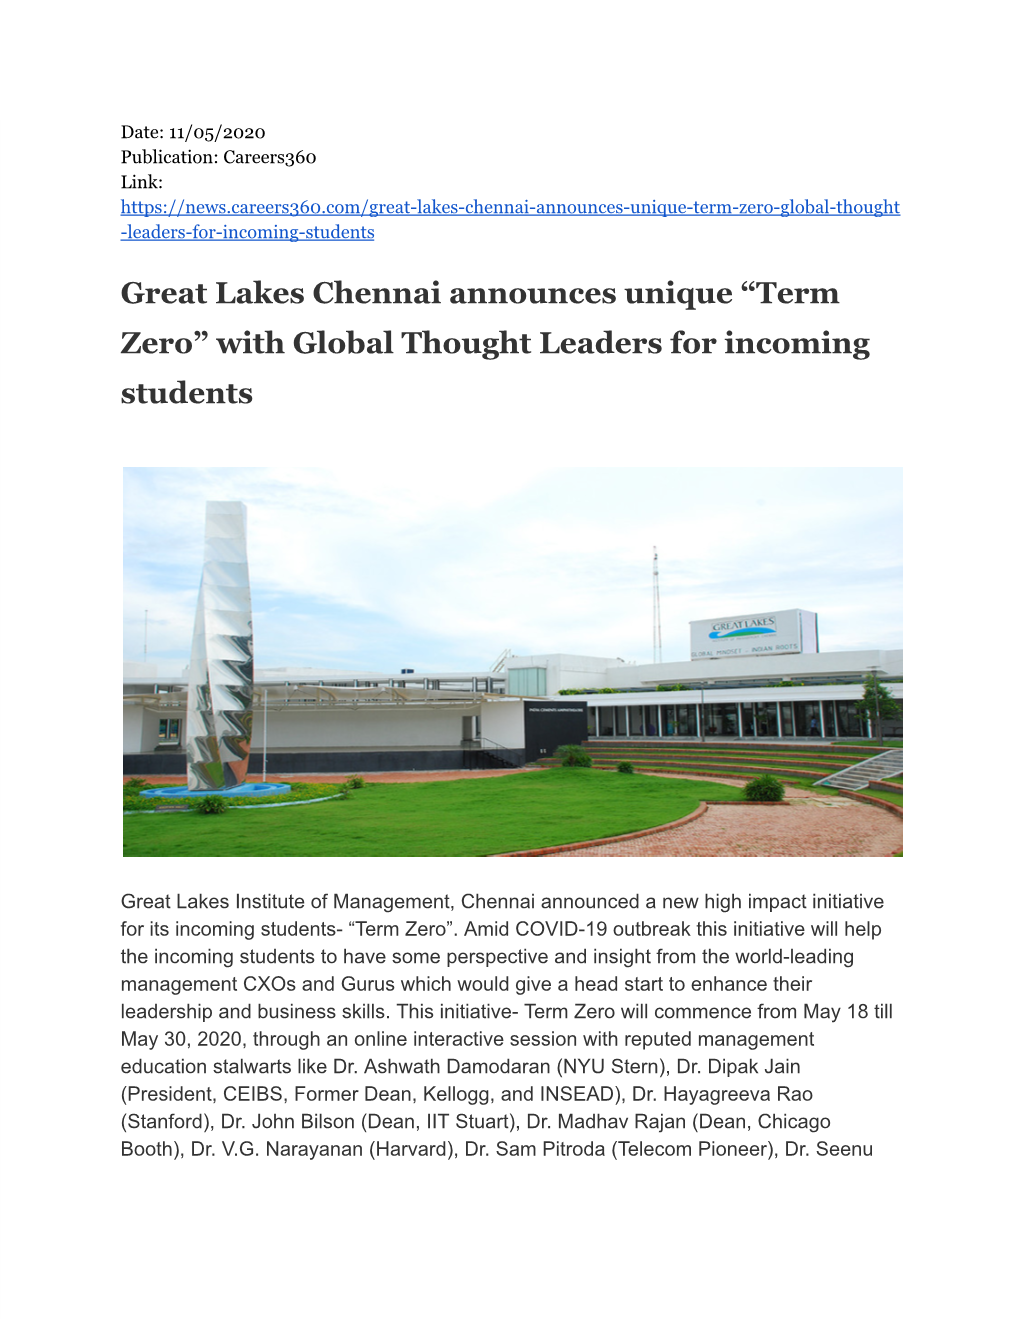 Great Lakes Chennai Announces Unique “Term Zero” with Global Thought Leaders for Incoming Students